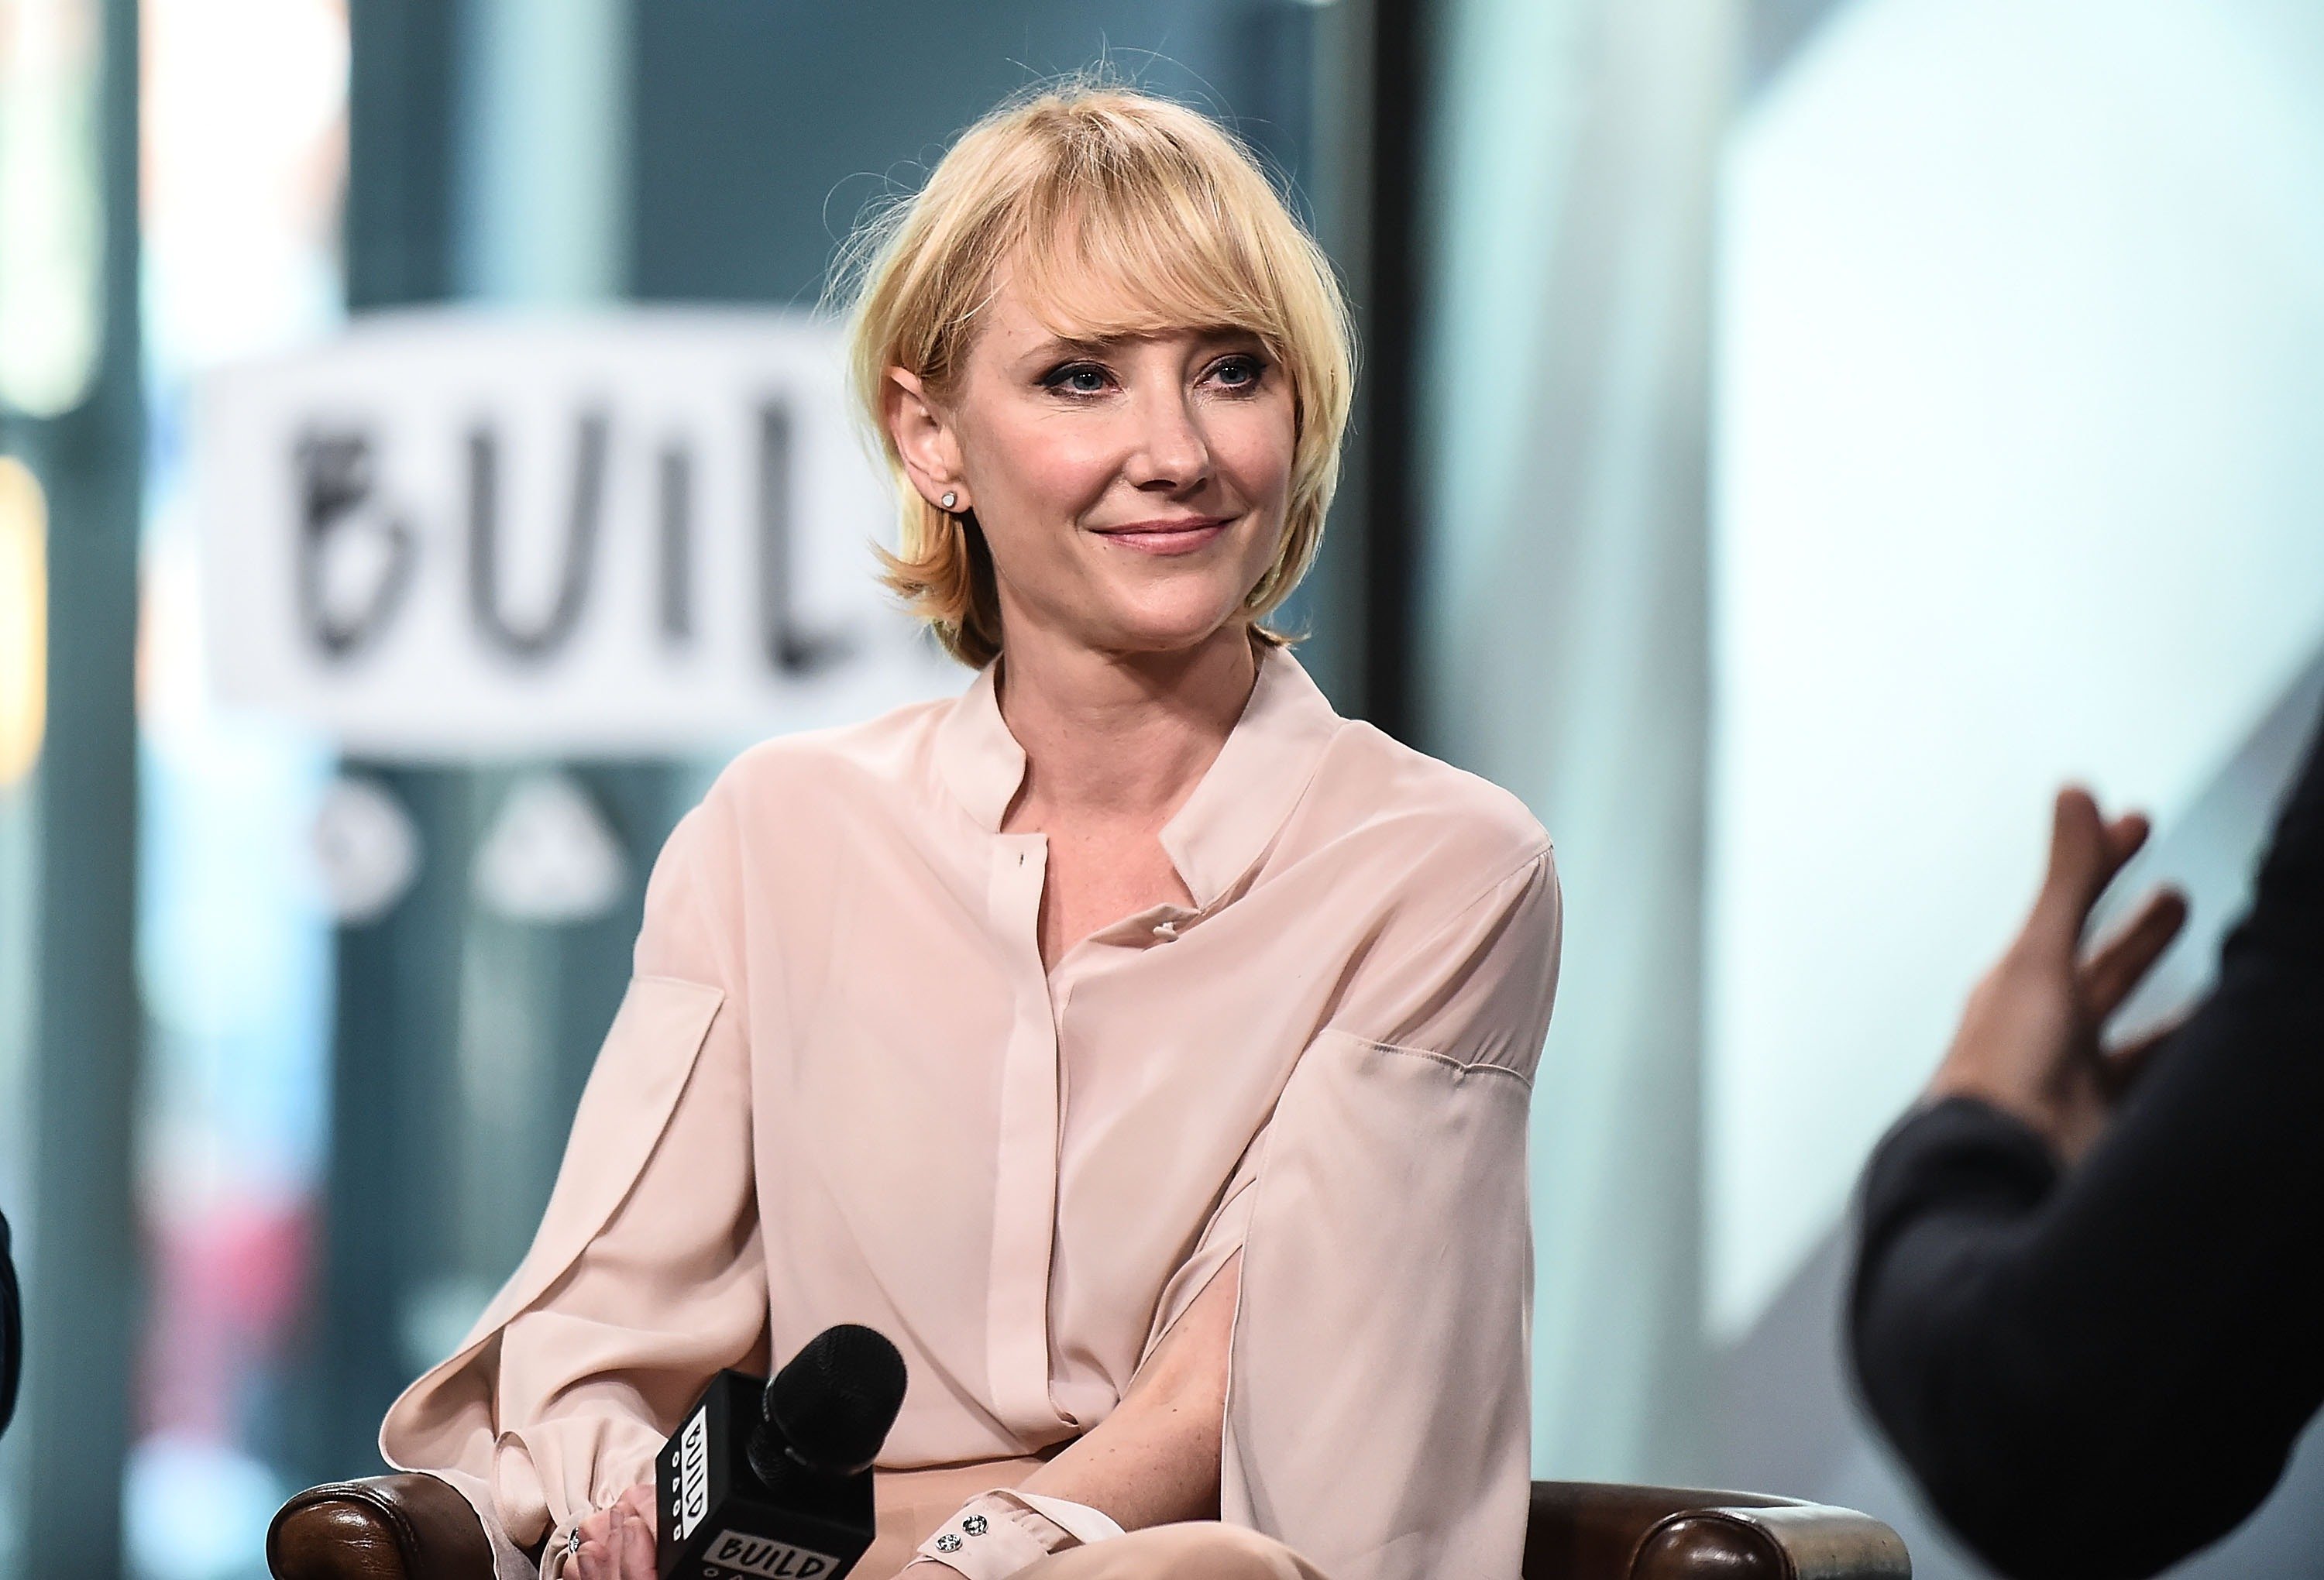 Anne Heche attends the Build Series to discuss the new show 'The Brave' at Build Studio on September 25, 2017 in New York City. I Source: Getty Images